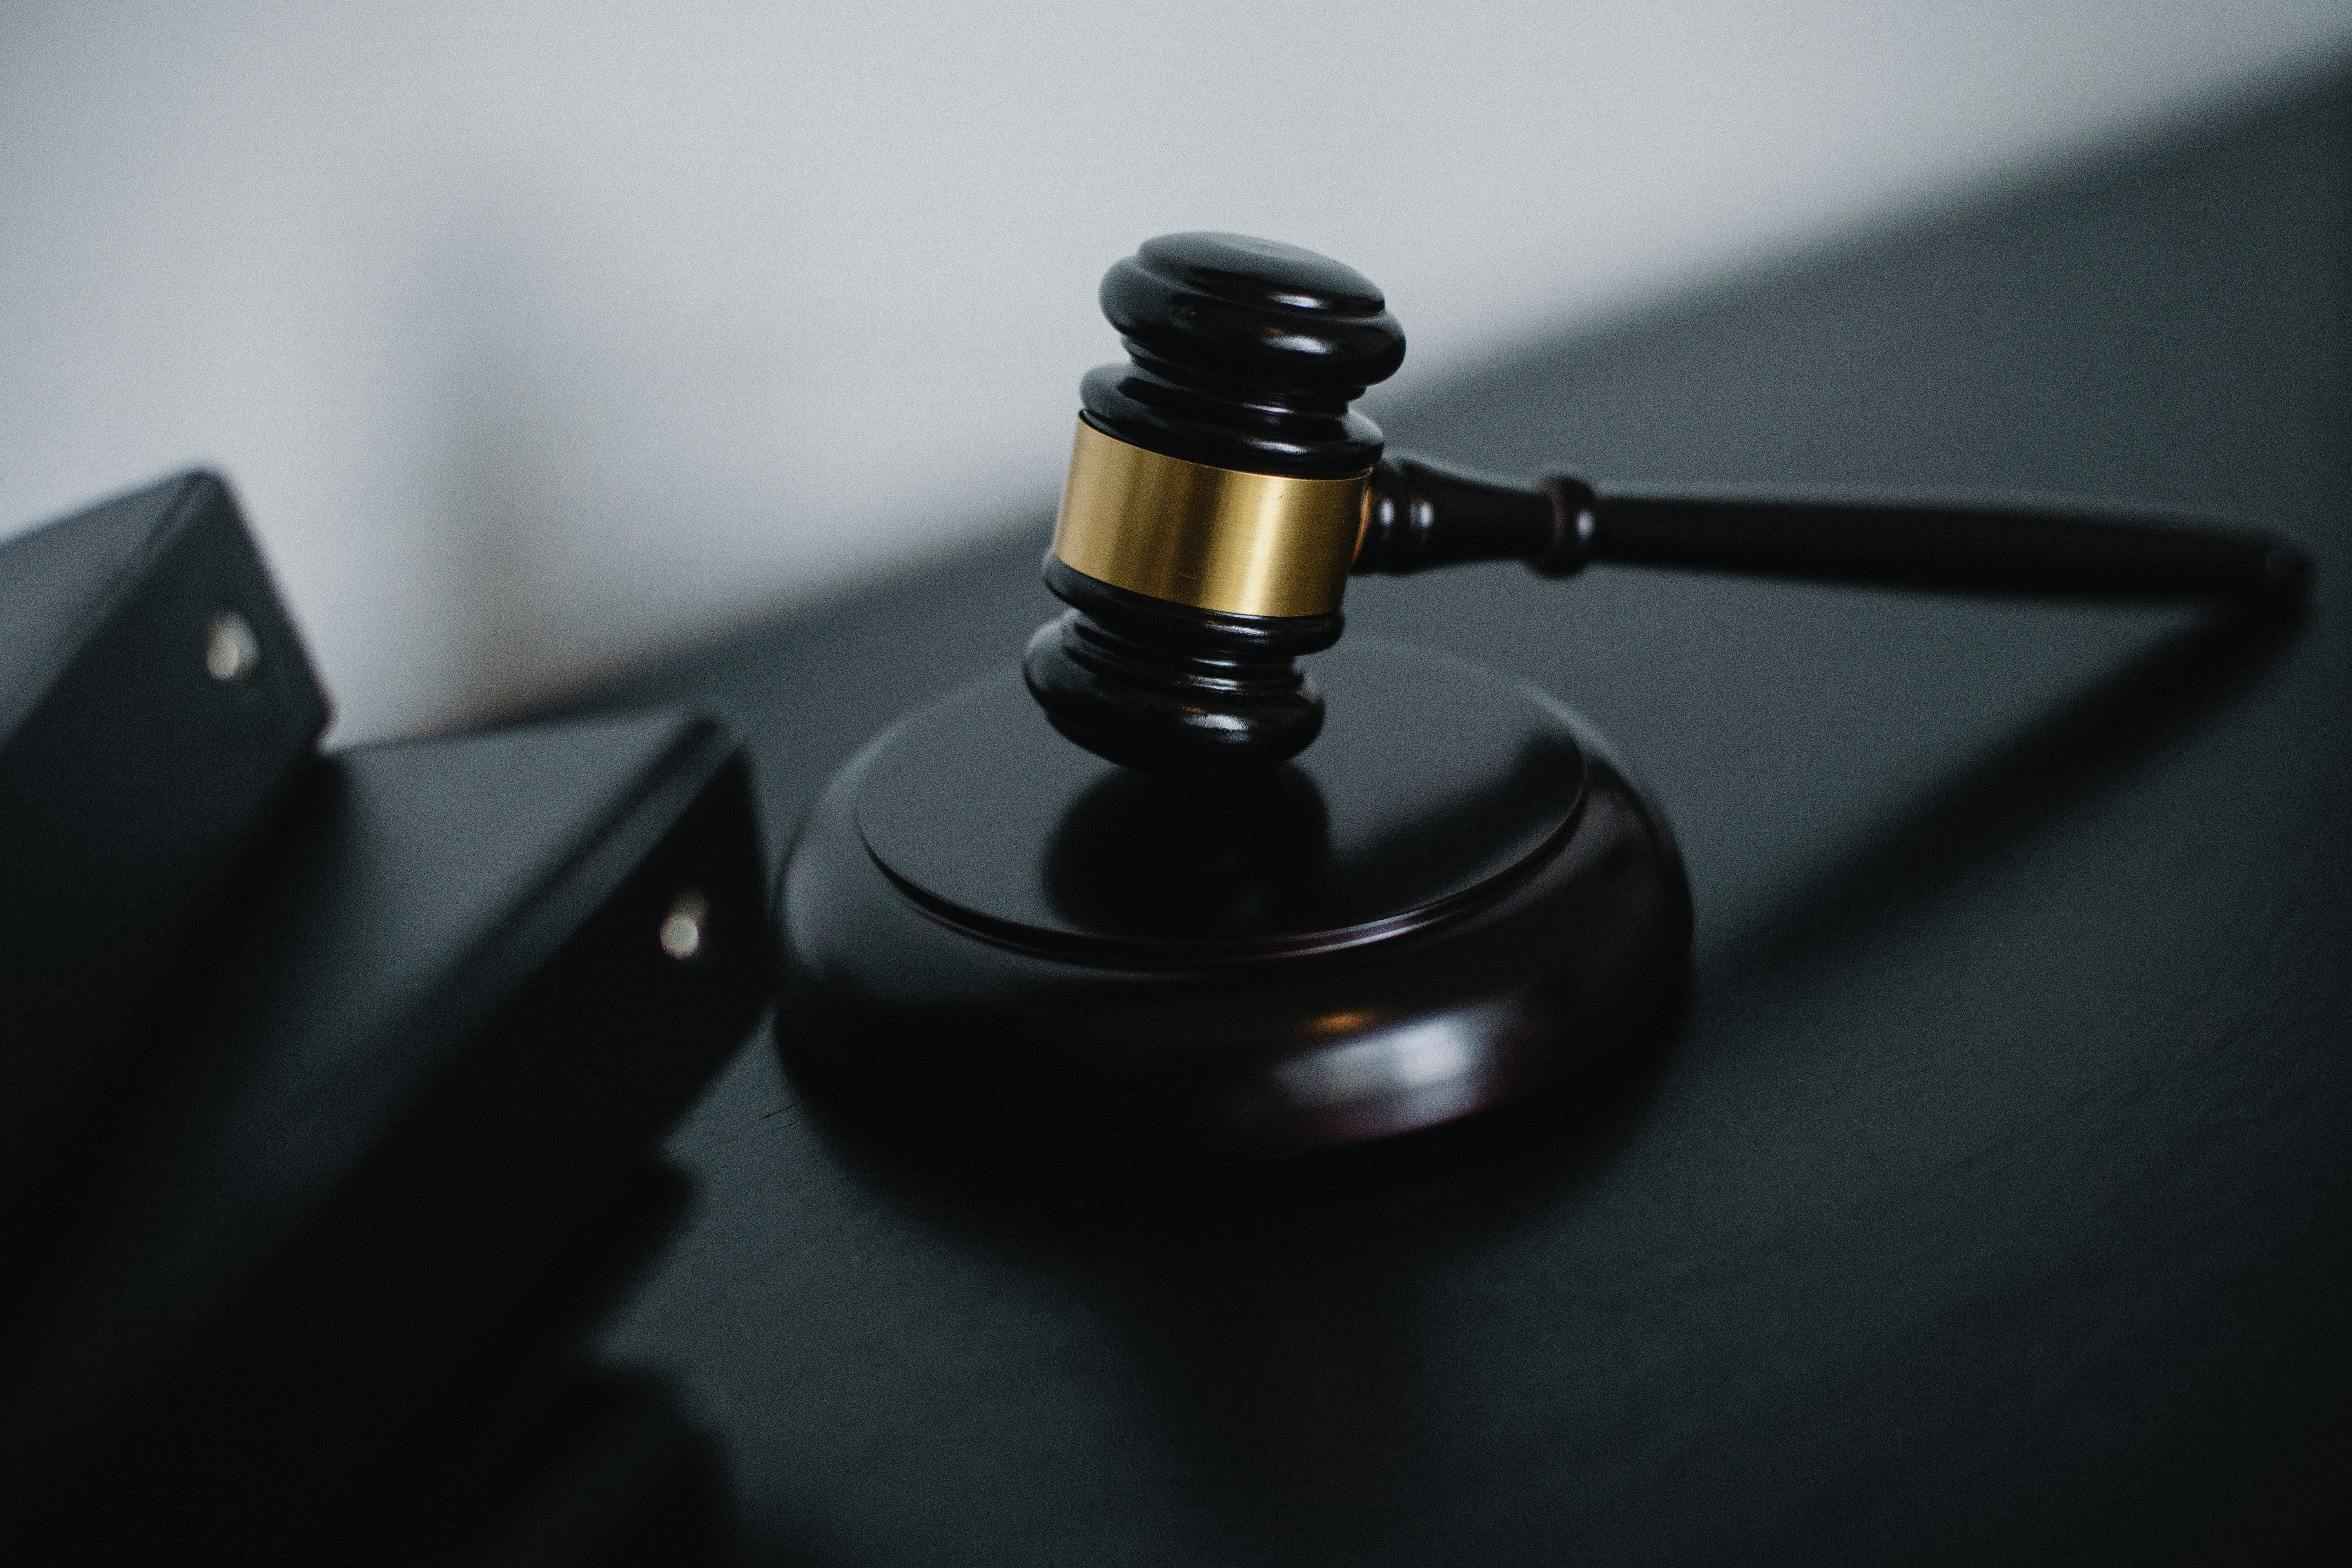 Pictured - A small judge gavel placed on the table near folders | Source: Pexels